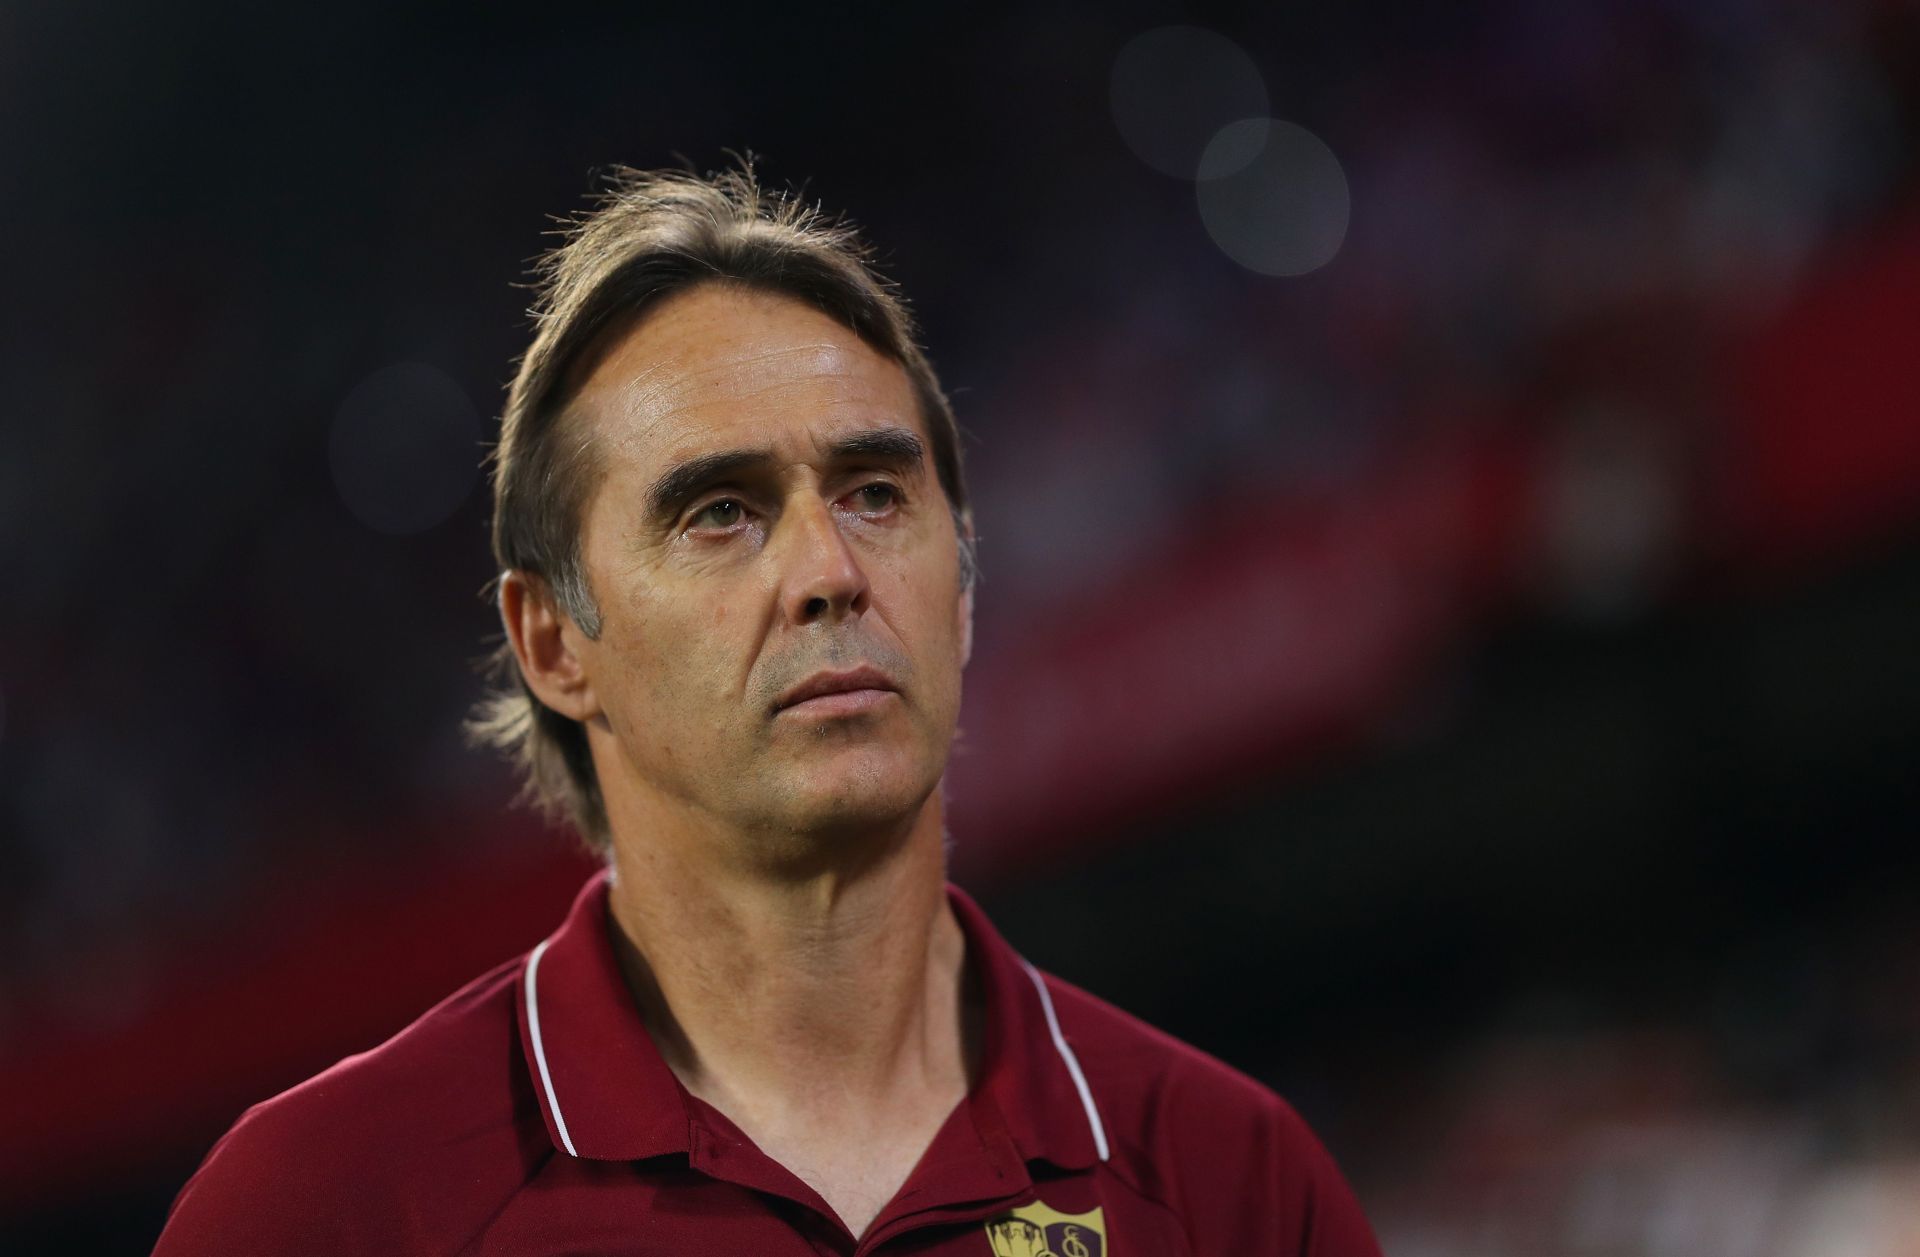 Julen Lopetegui is currently the manager of Sevilla.